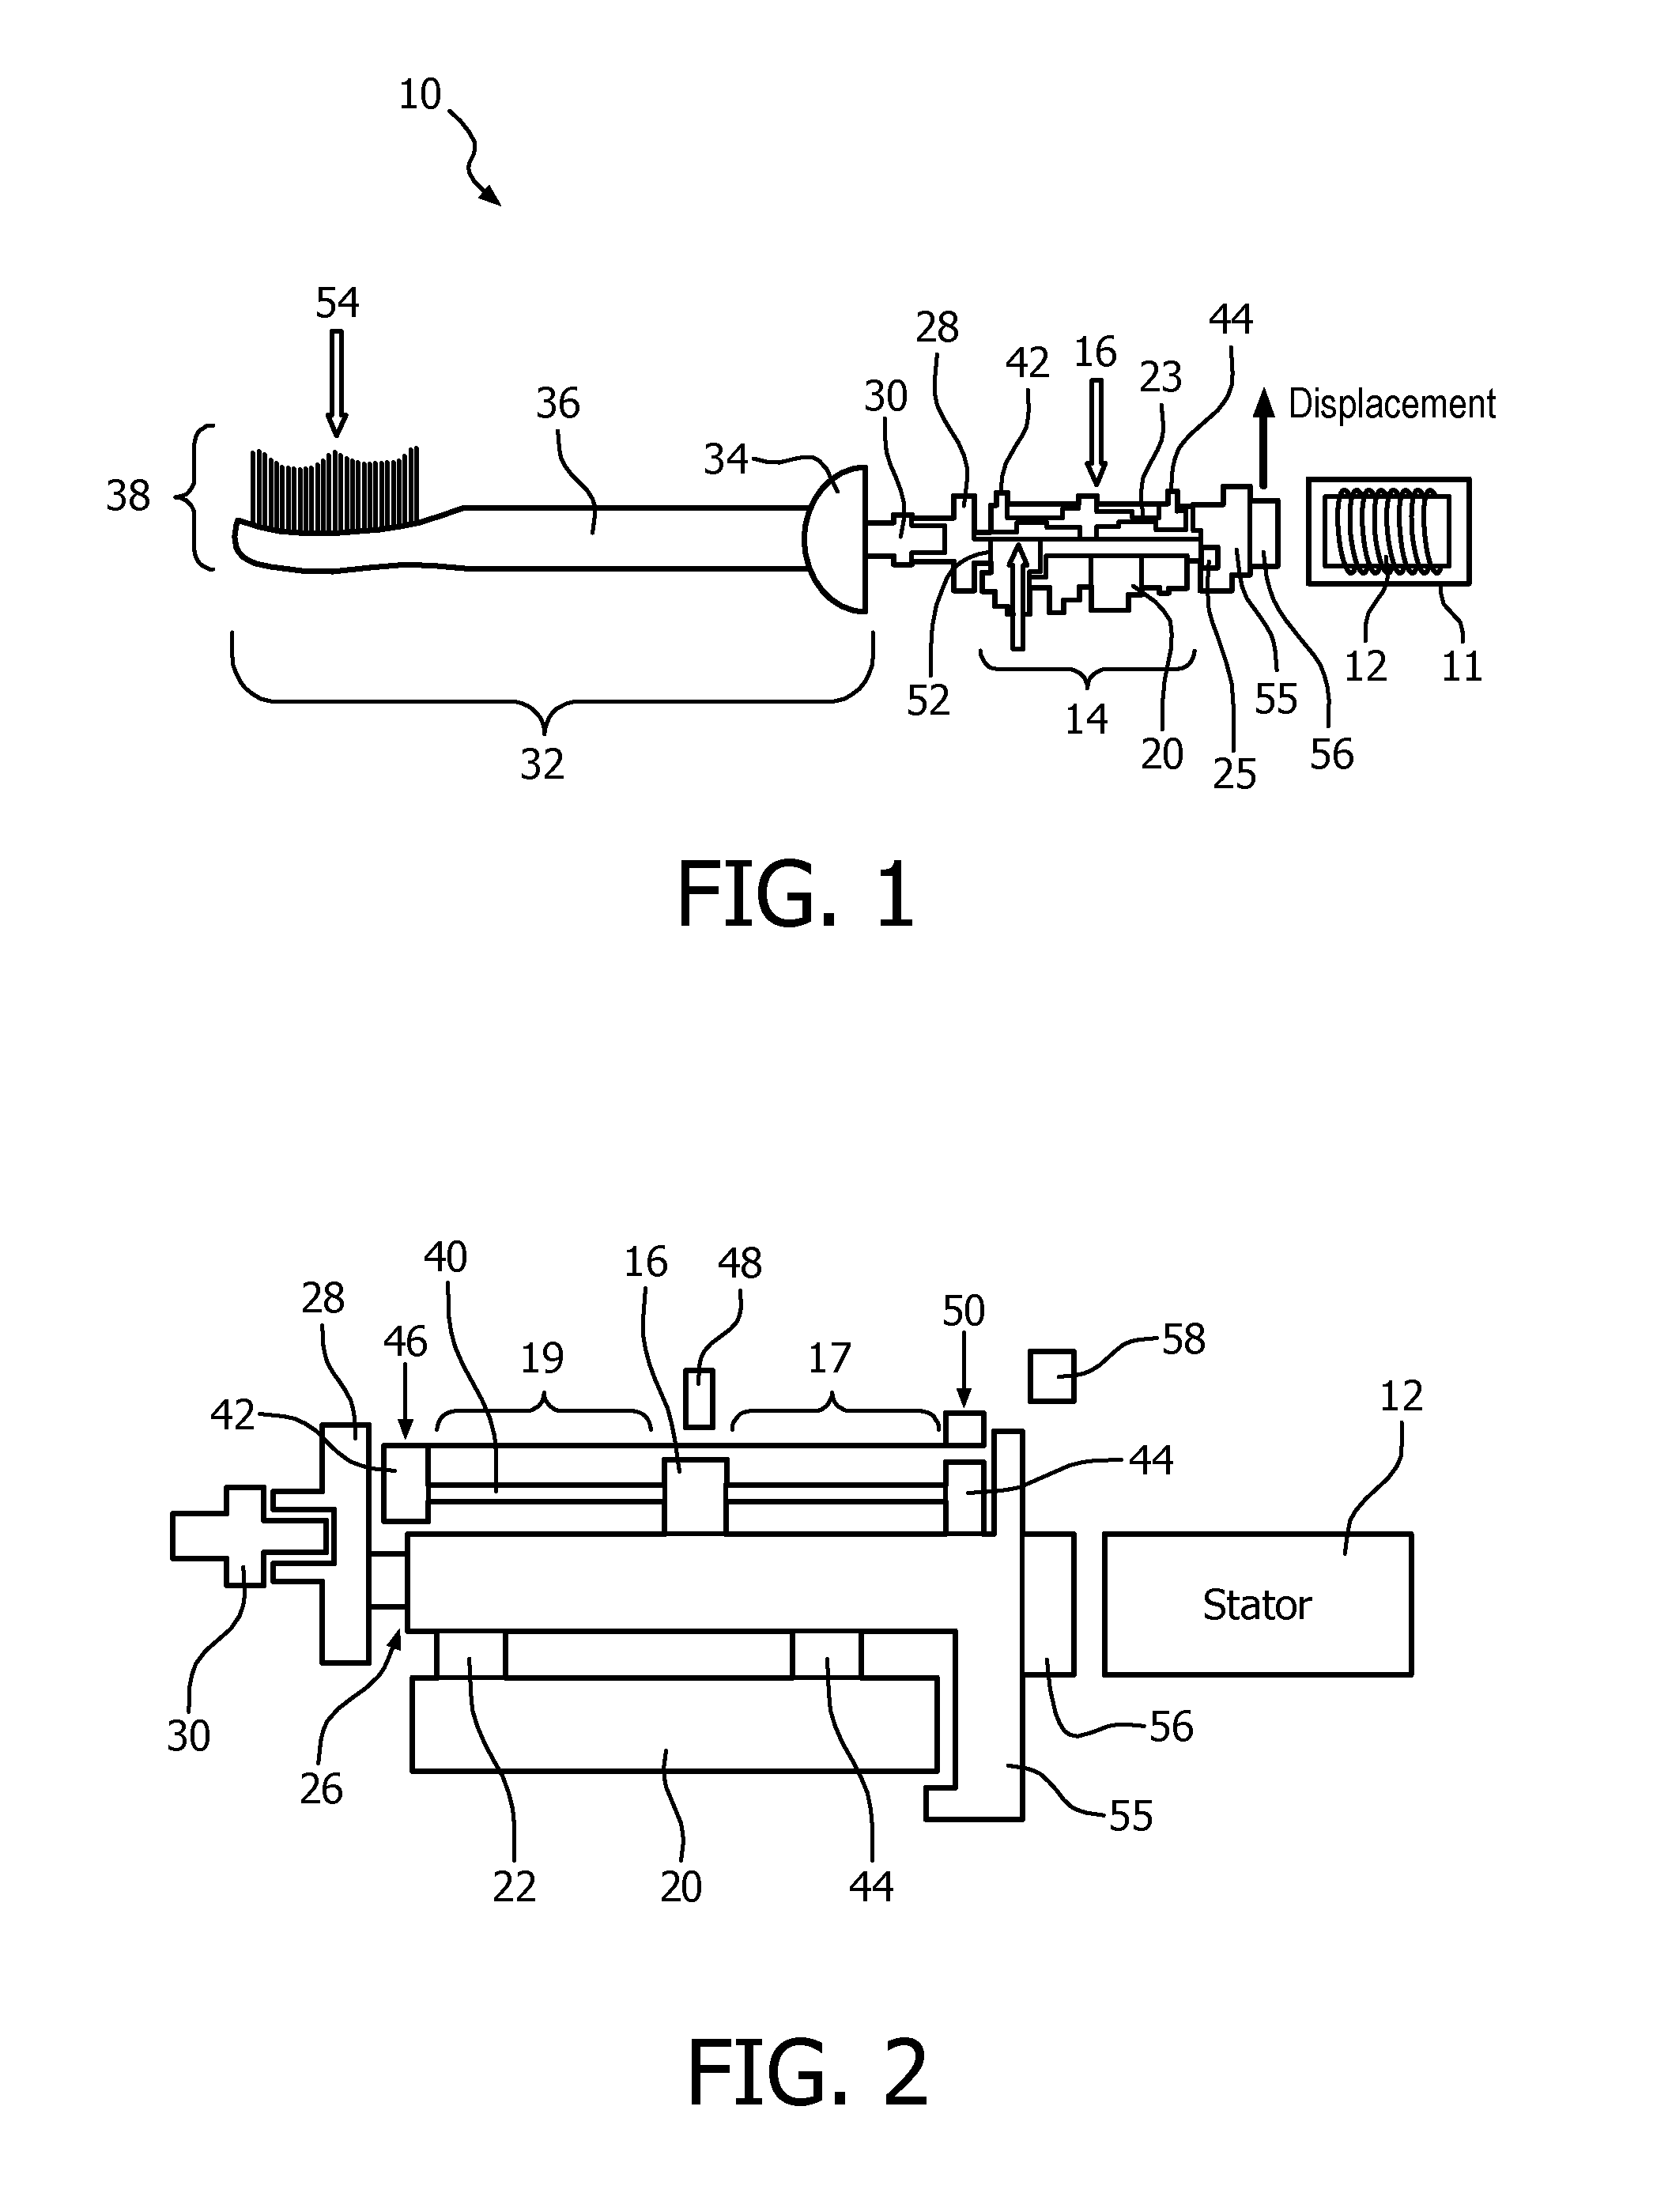 Force sensor providing continuous feedback for a resonant drive toothbrush using a hall sensor